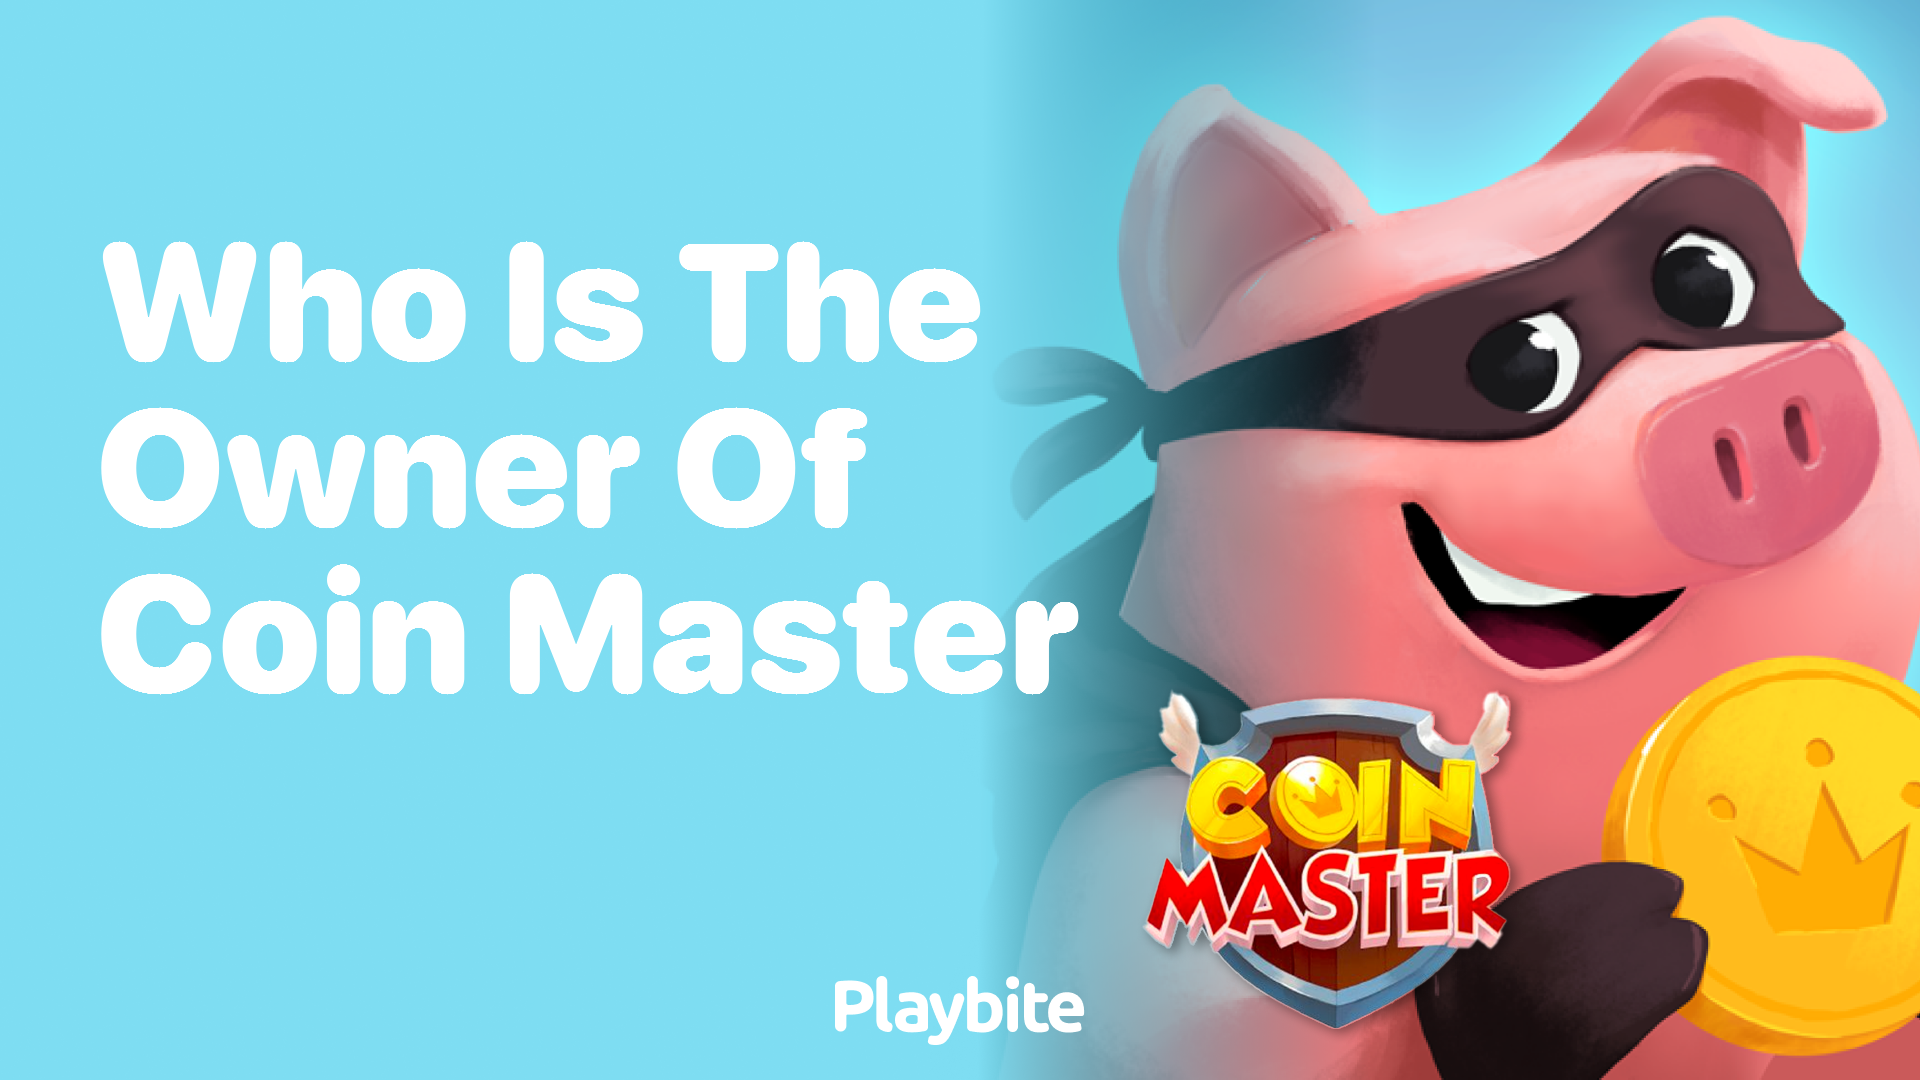 Who is the Owner of Coin Master?